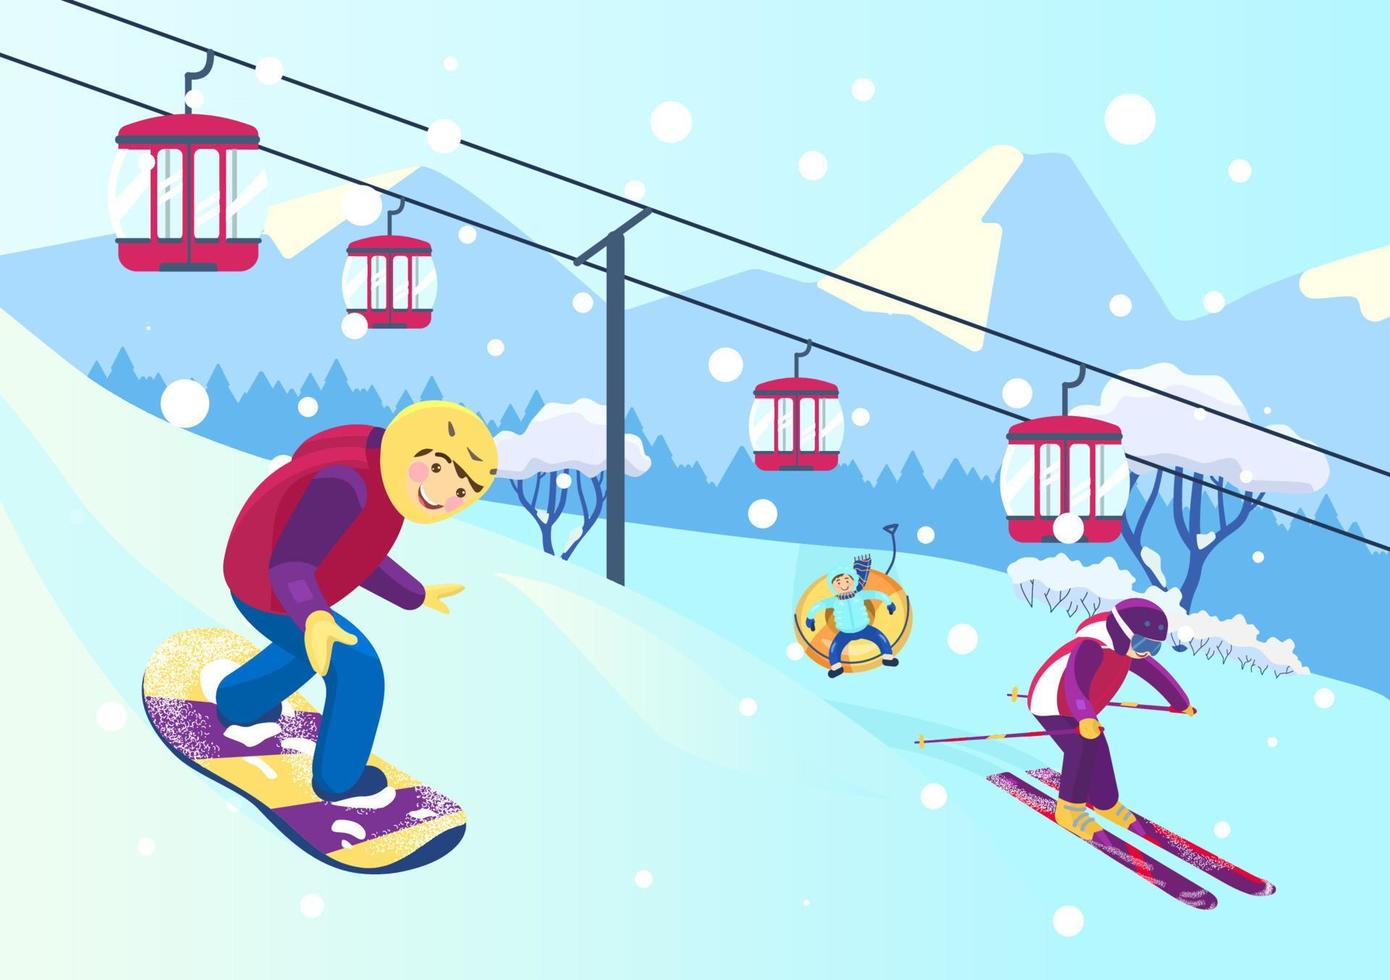 Vector illustration of mountain slope with people doing different winter sports. Snowboarding, skiing, snow tubing. Cableway. Snowy mountains landscape.